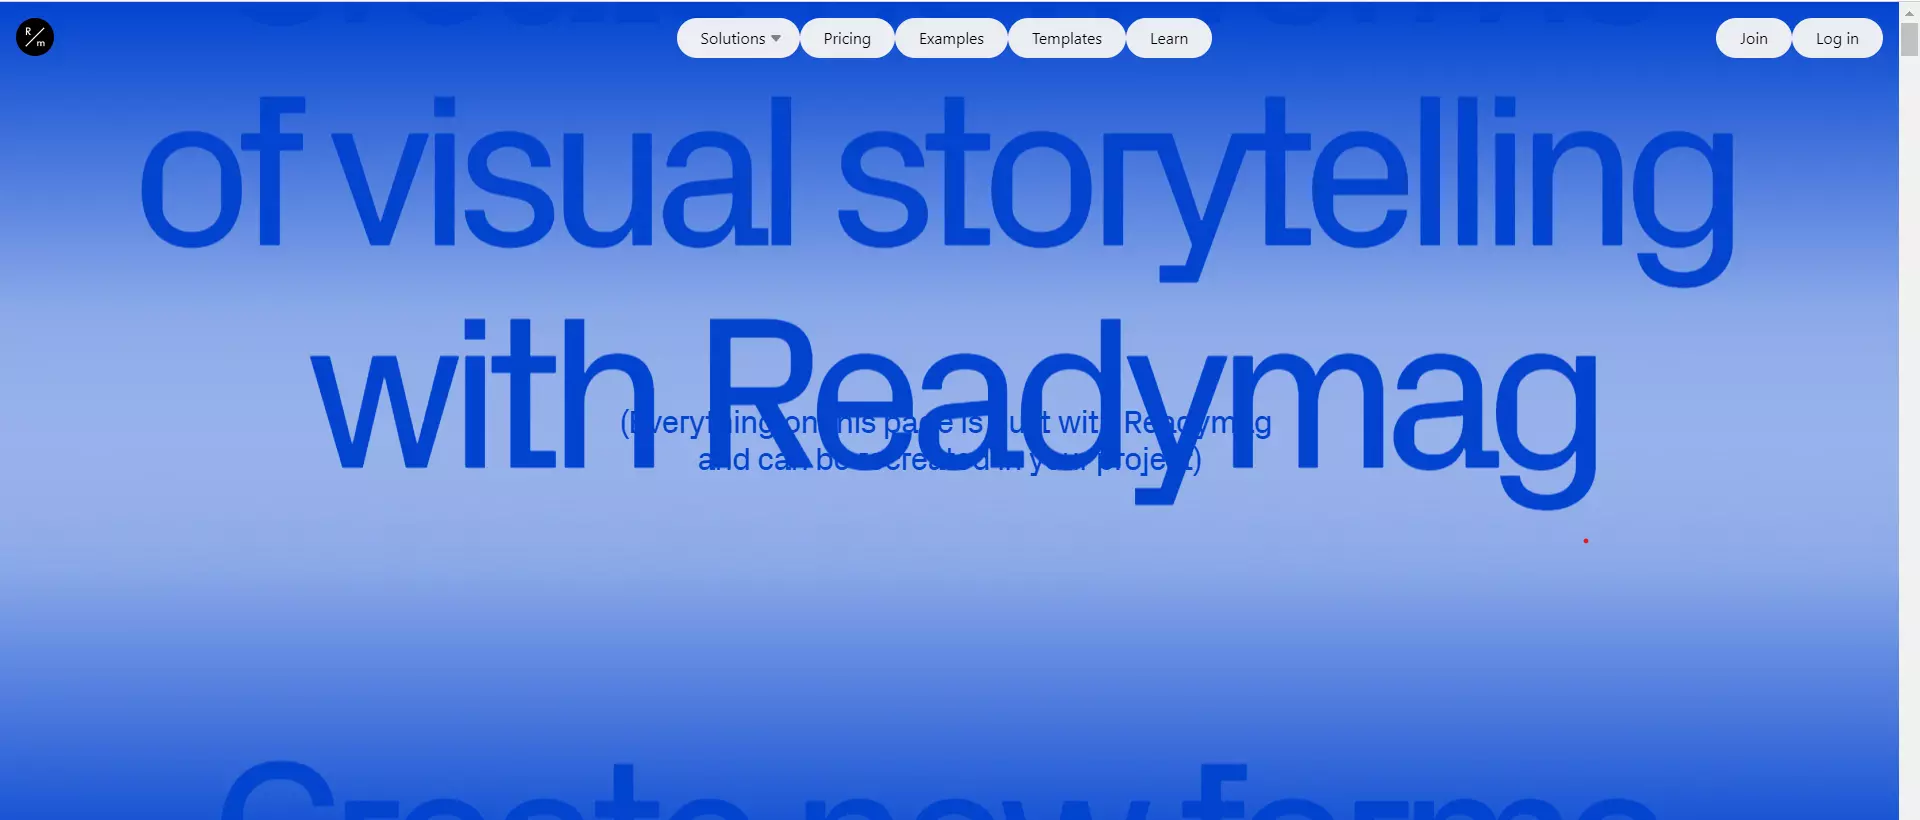 Readymag Landing Page